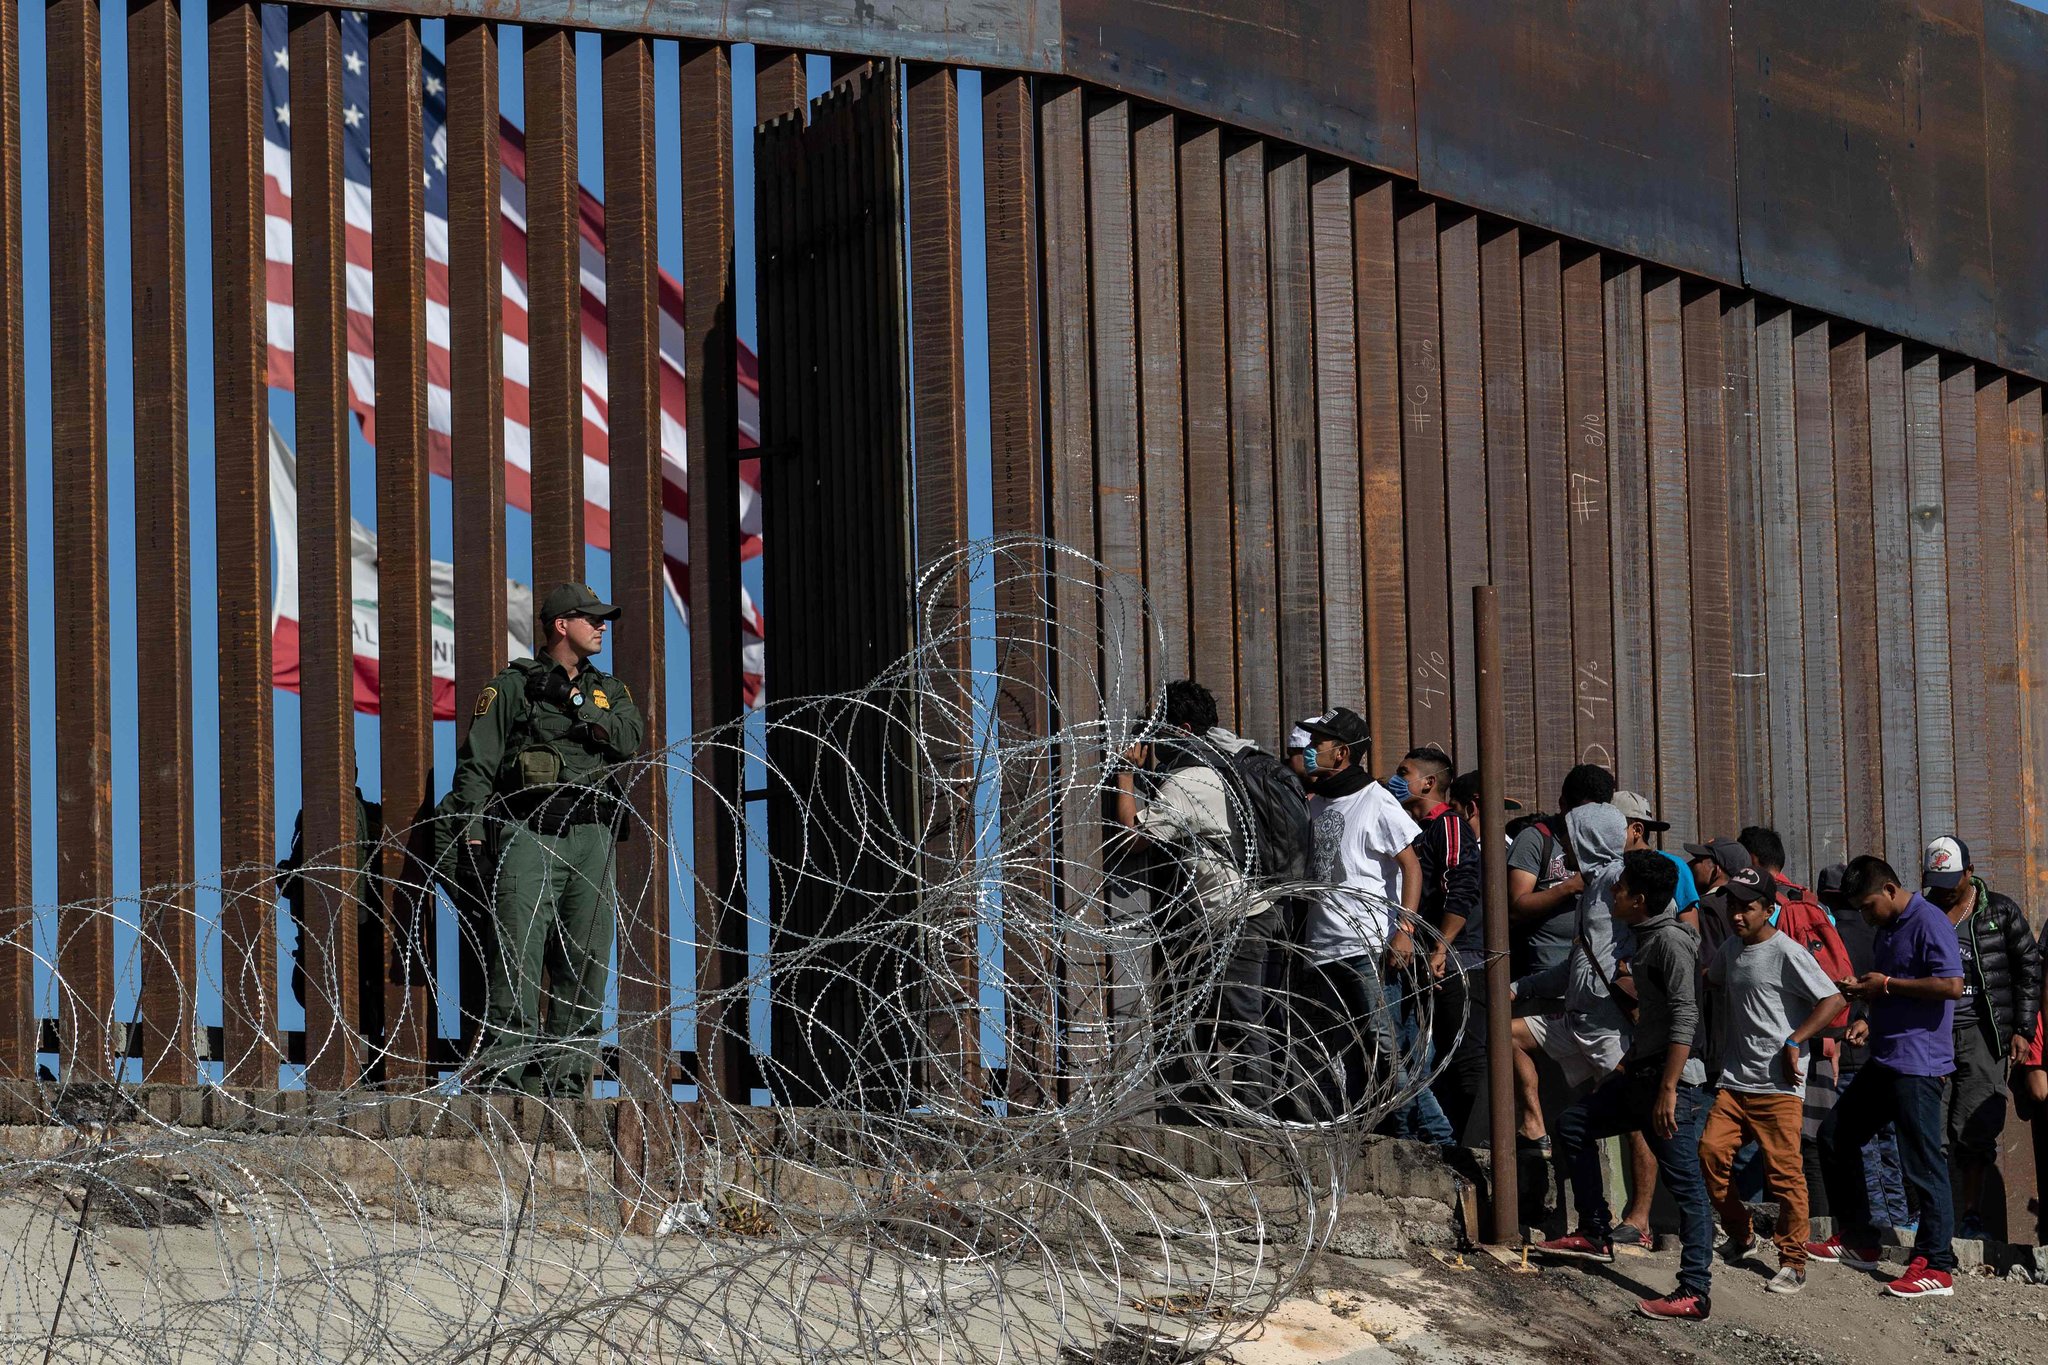 Migrants at a border crossing of the US southern border near Tijuana, Mexico, in 2018. Photo: Guillermo Arias/AFP.